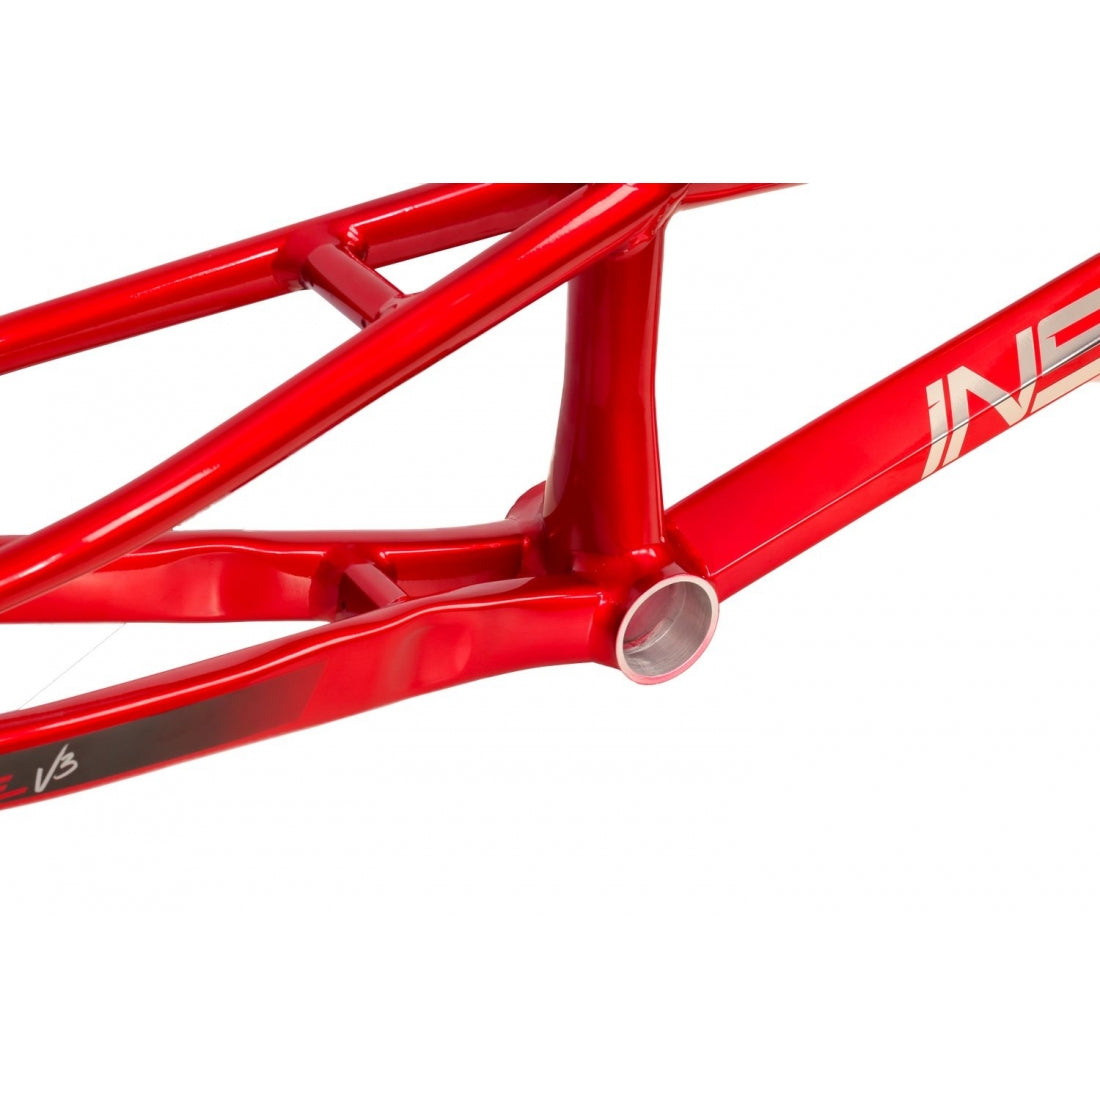 Close-up of an aluminium frame showing the seat stays and part of the top tube with Inspyre Concorde V3 Junior Frame branding visible.